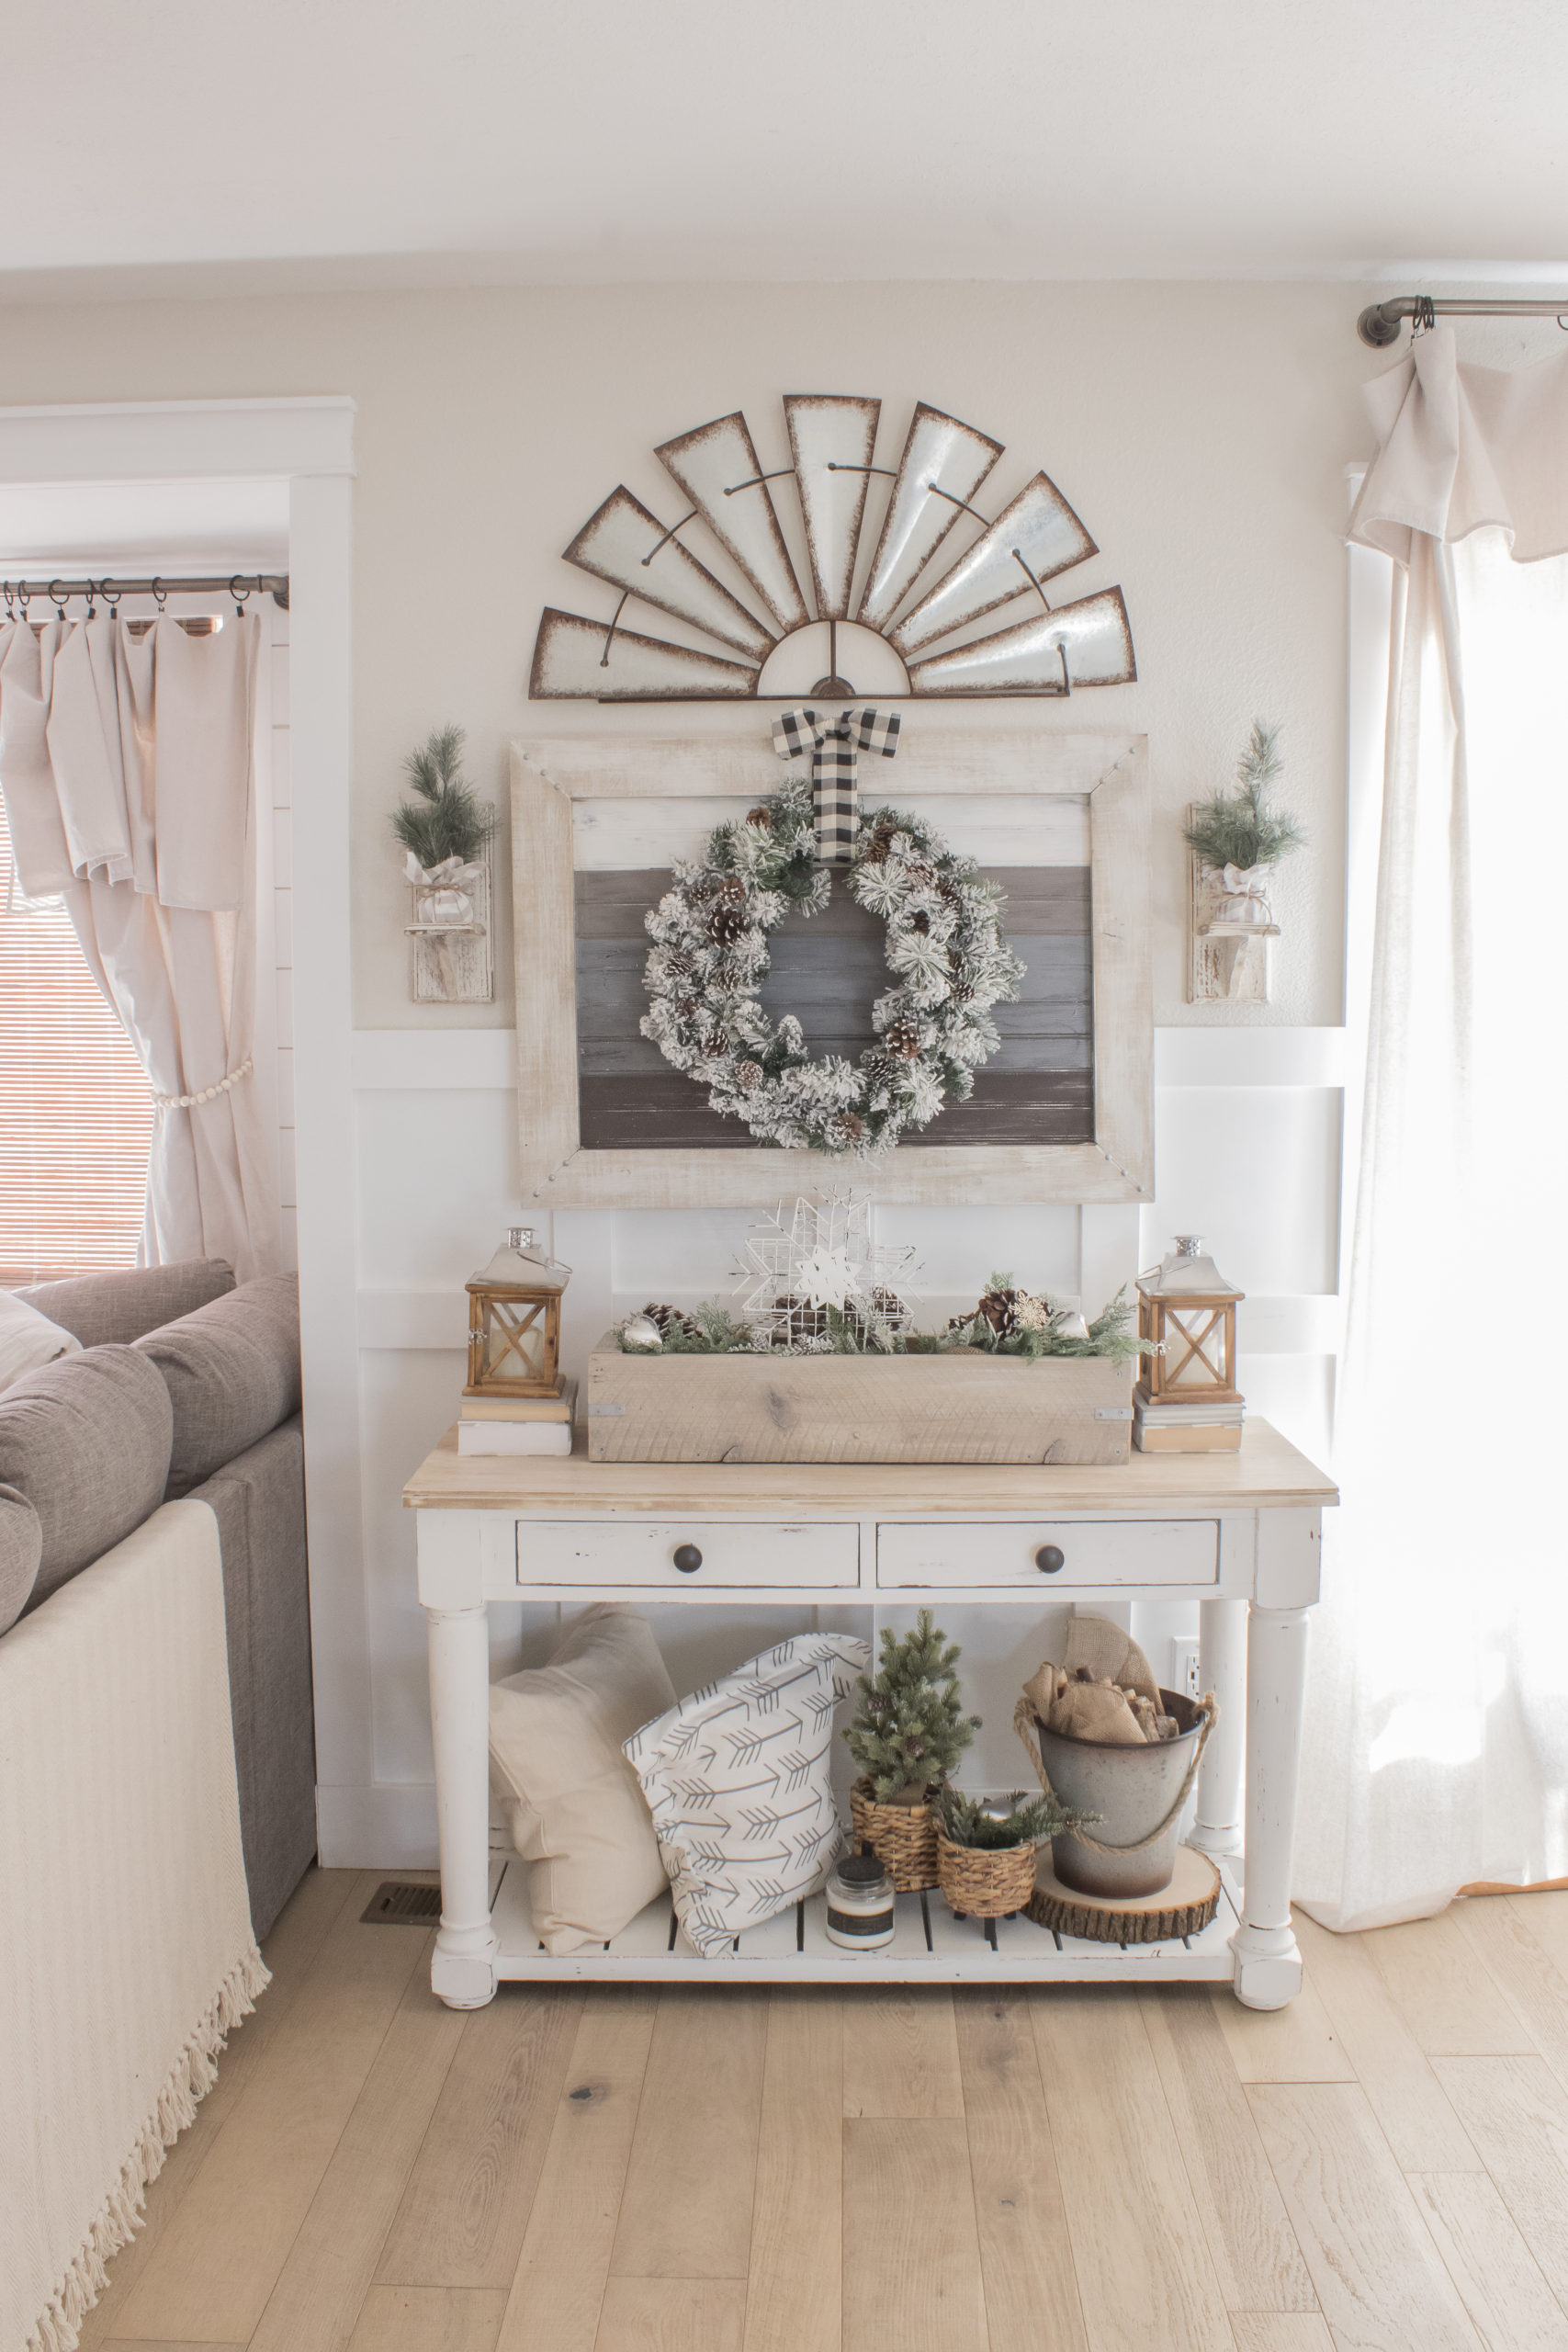 Transitional Decor from Christmas to Winter/Valentines